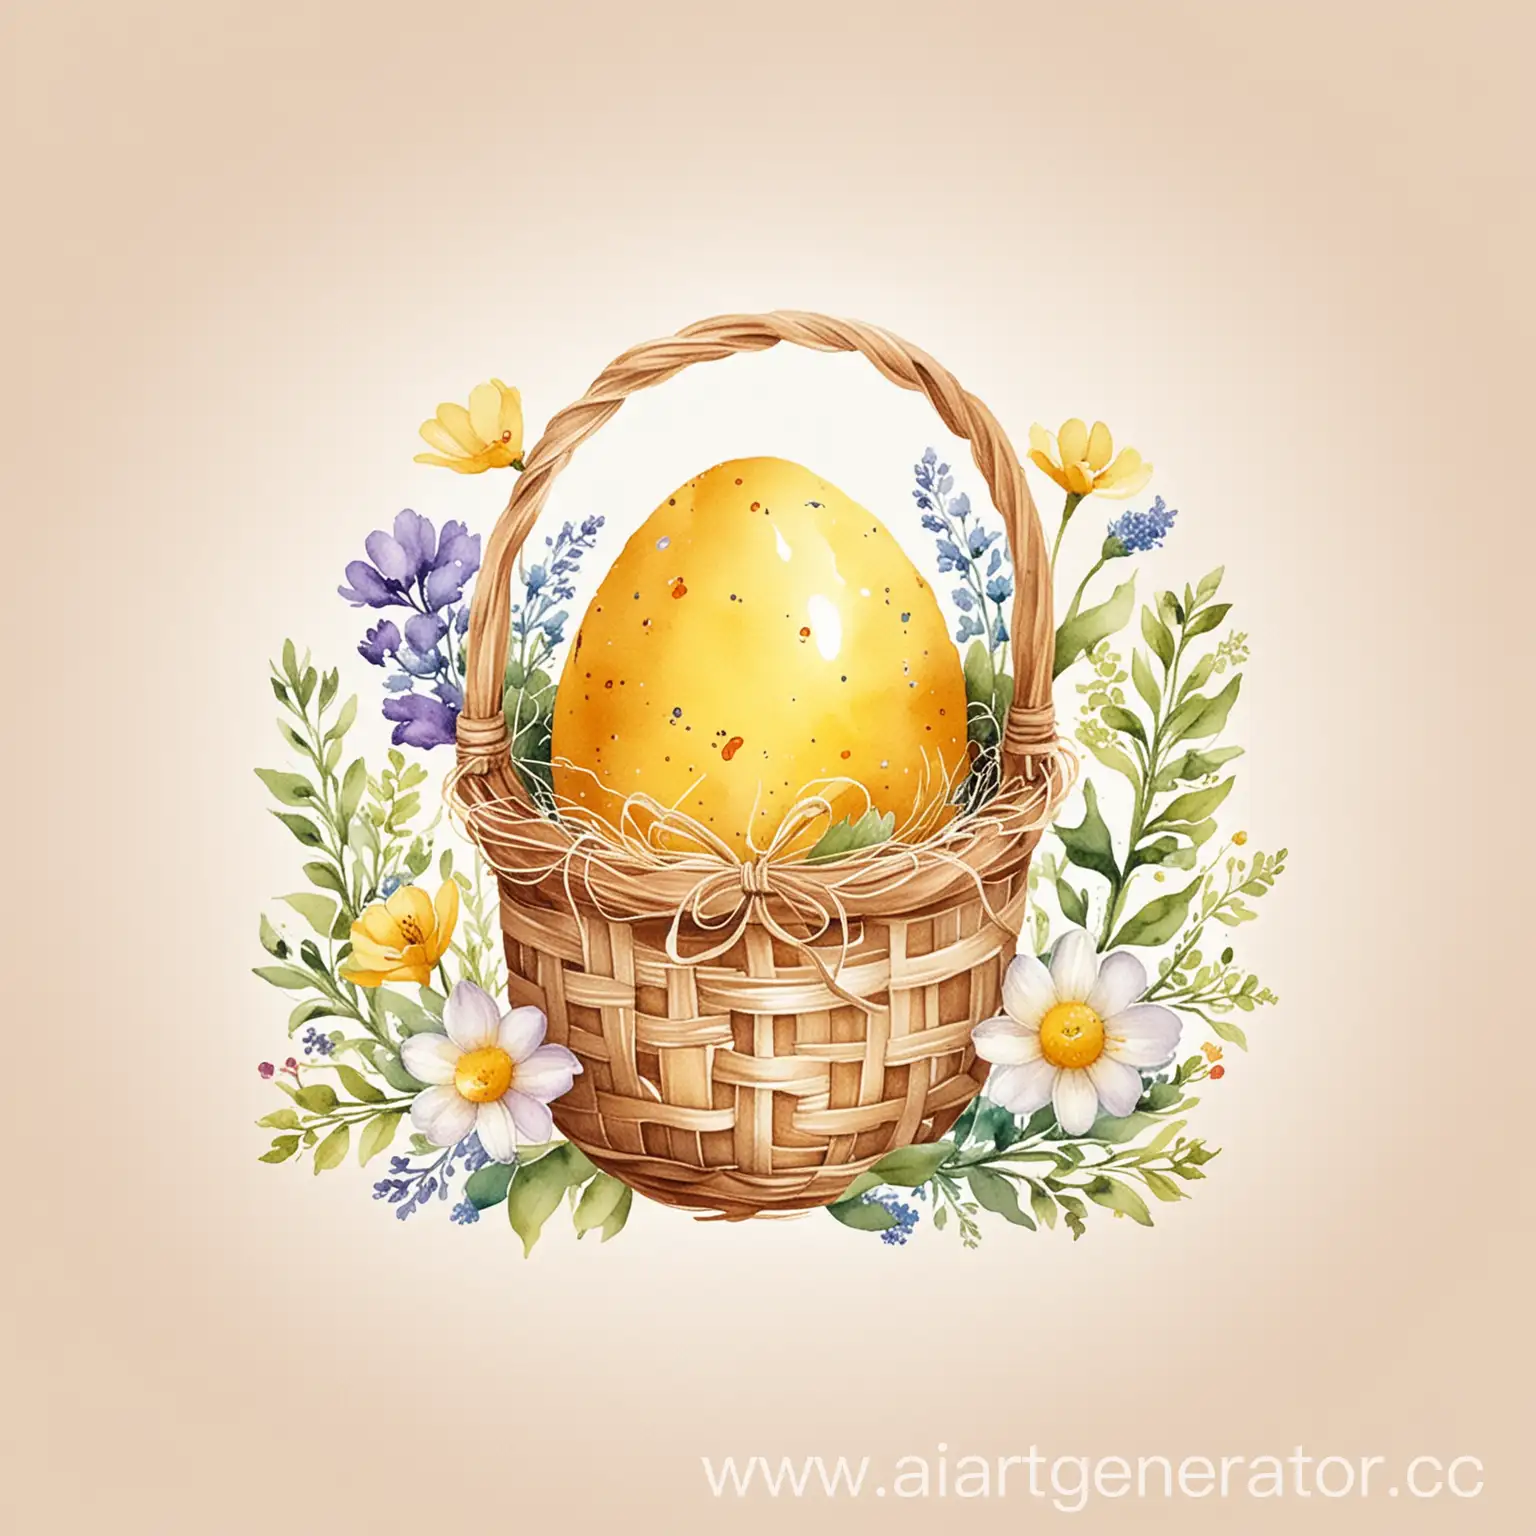 Watercolor-Yellow-Easter-Basket-with-Egg-and-Flowers-on-White-Background